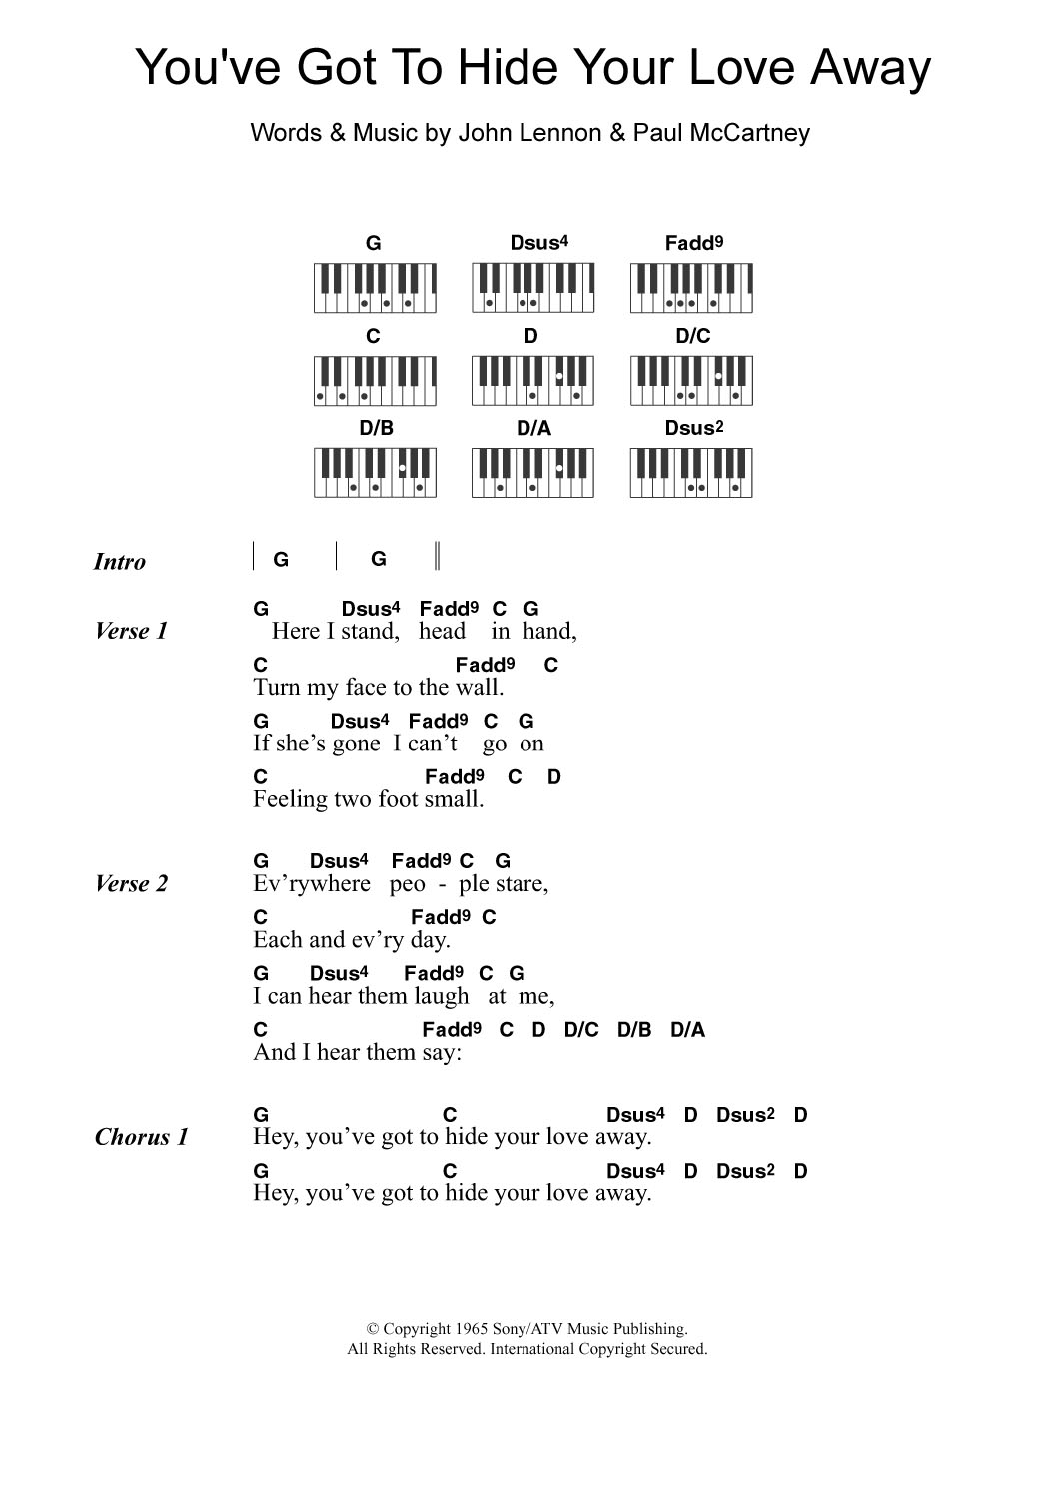 Download The Beatles You've Got To Hide Your Love Away Sheet Music